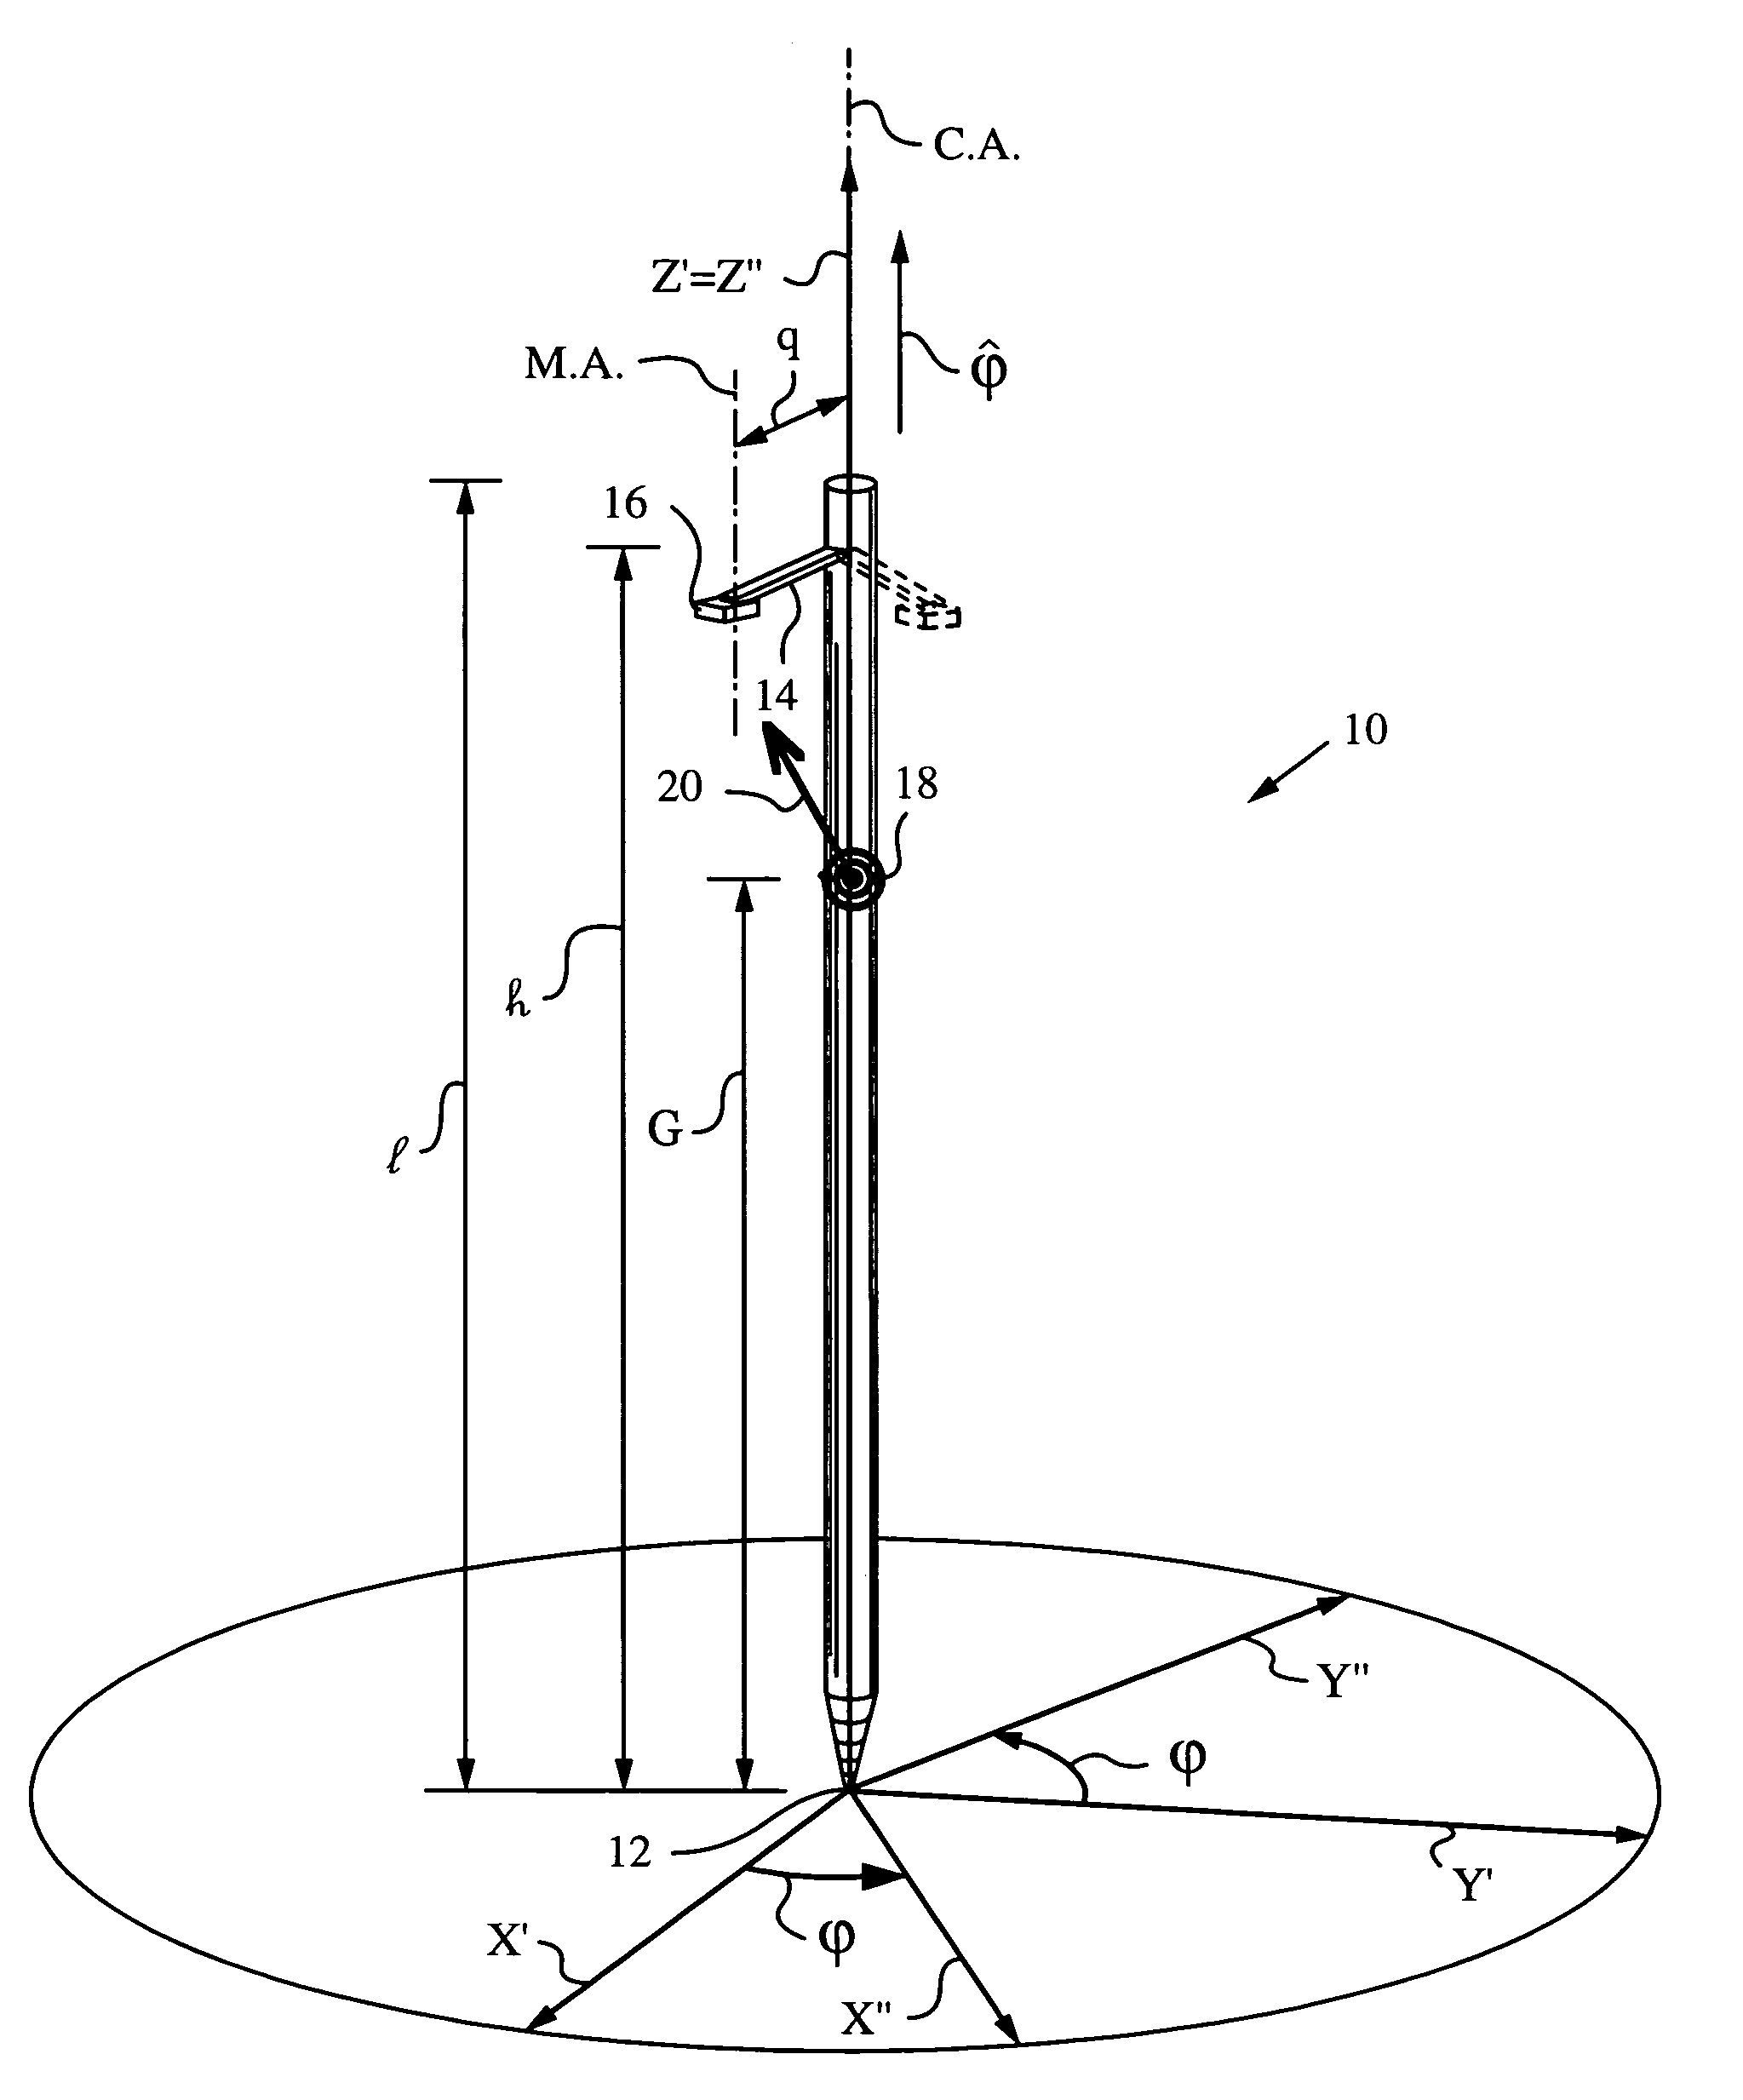 Method and apparatus for determining absolute position of a tip of an elongate object on a plane surface with invariant features